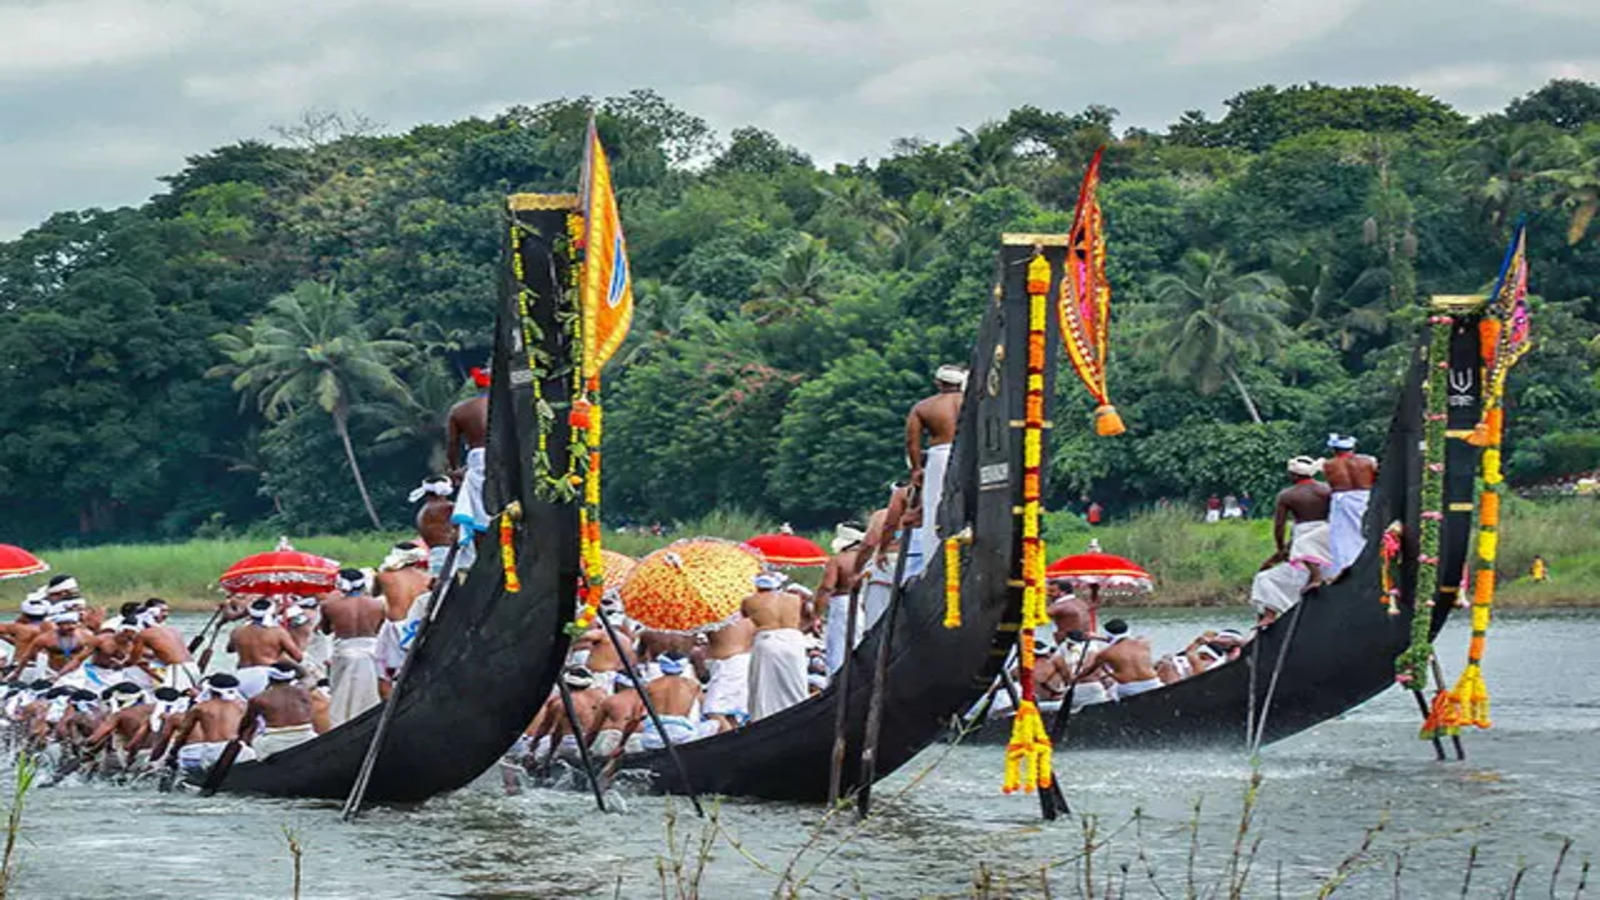 watch-vallam-kali-keralas-traditional-boat-race-held-symbolically-with-just-three-snake-boats-...jpg